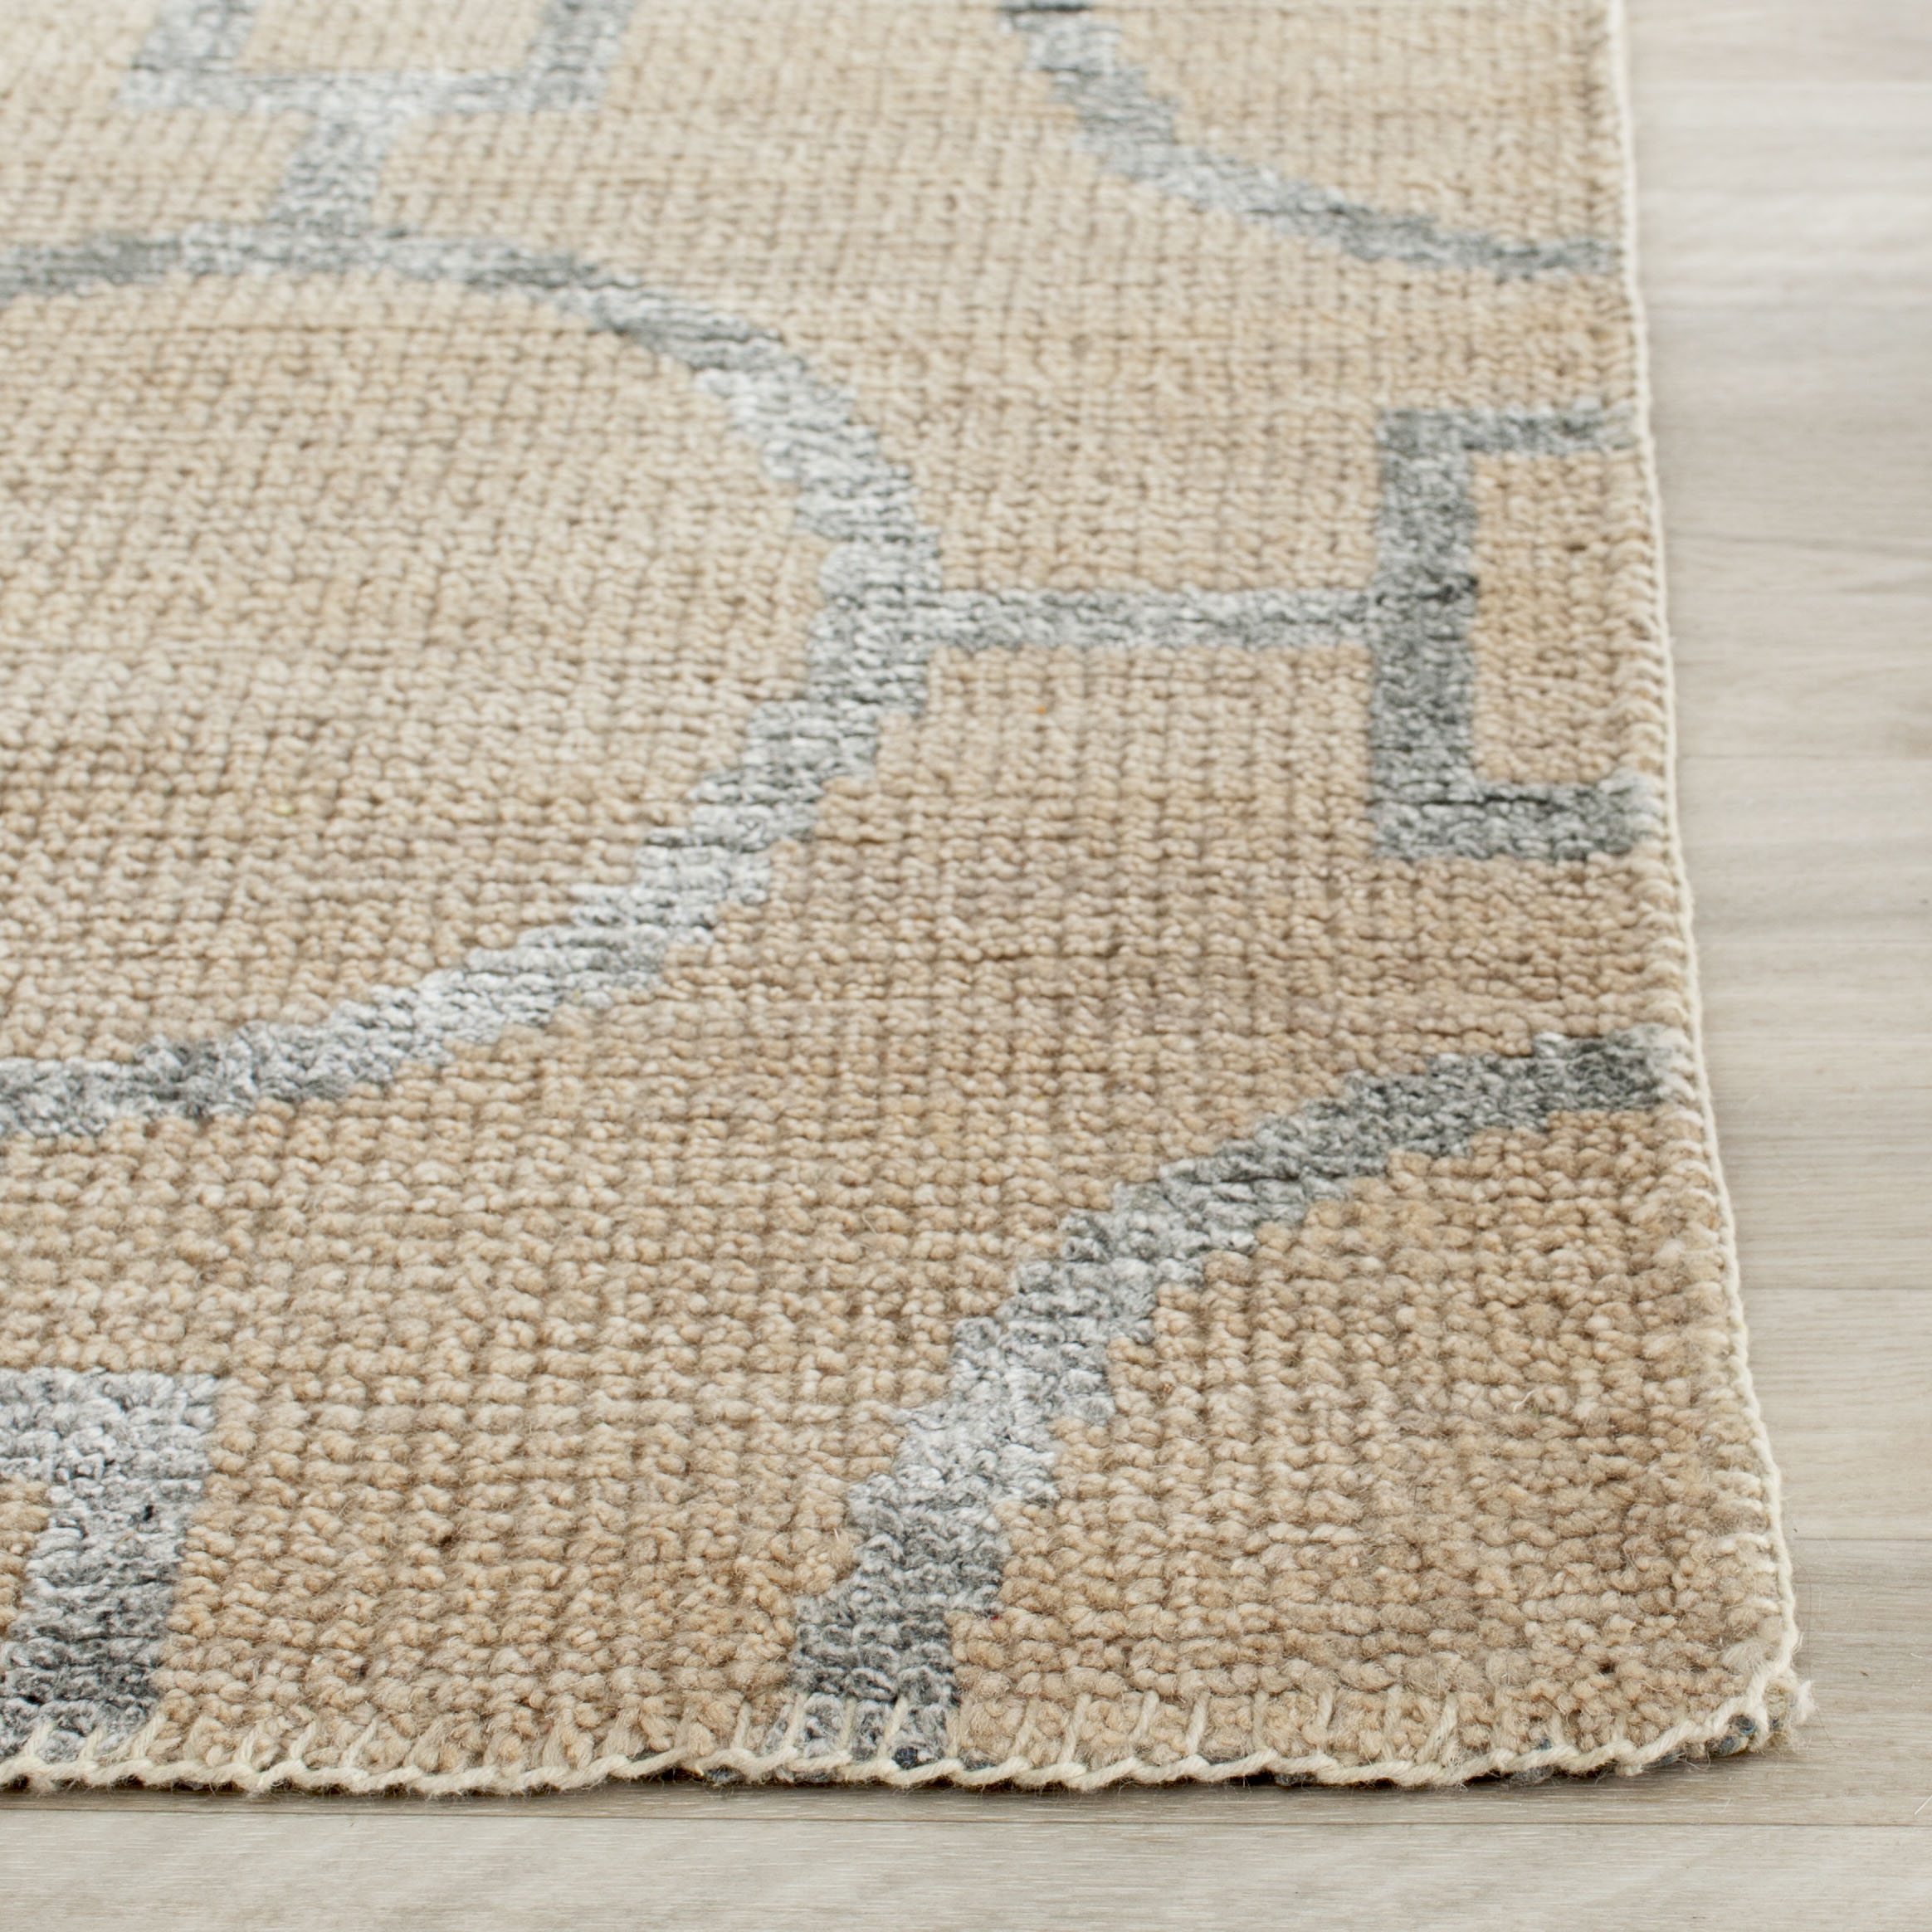 Arlo Home Hand Knotted Area Rug, STW202A, Beige,  8' X 10' - Image 2